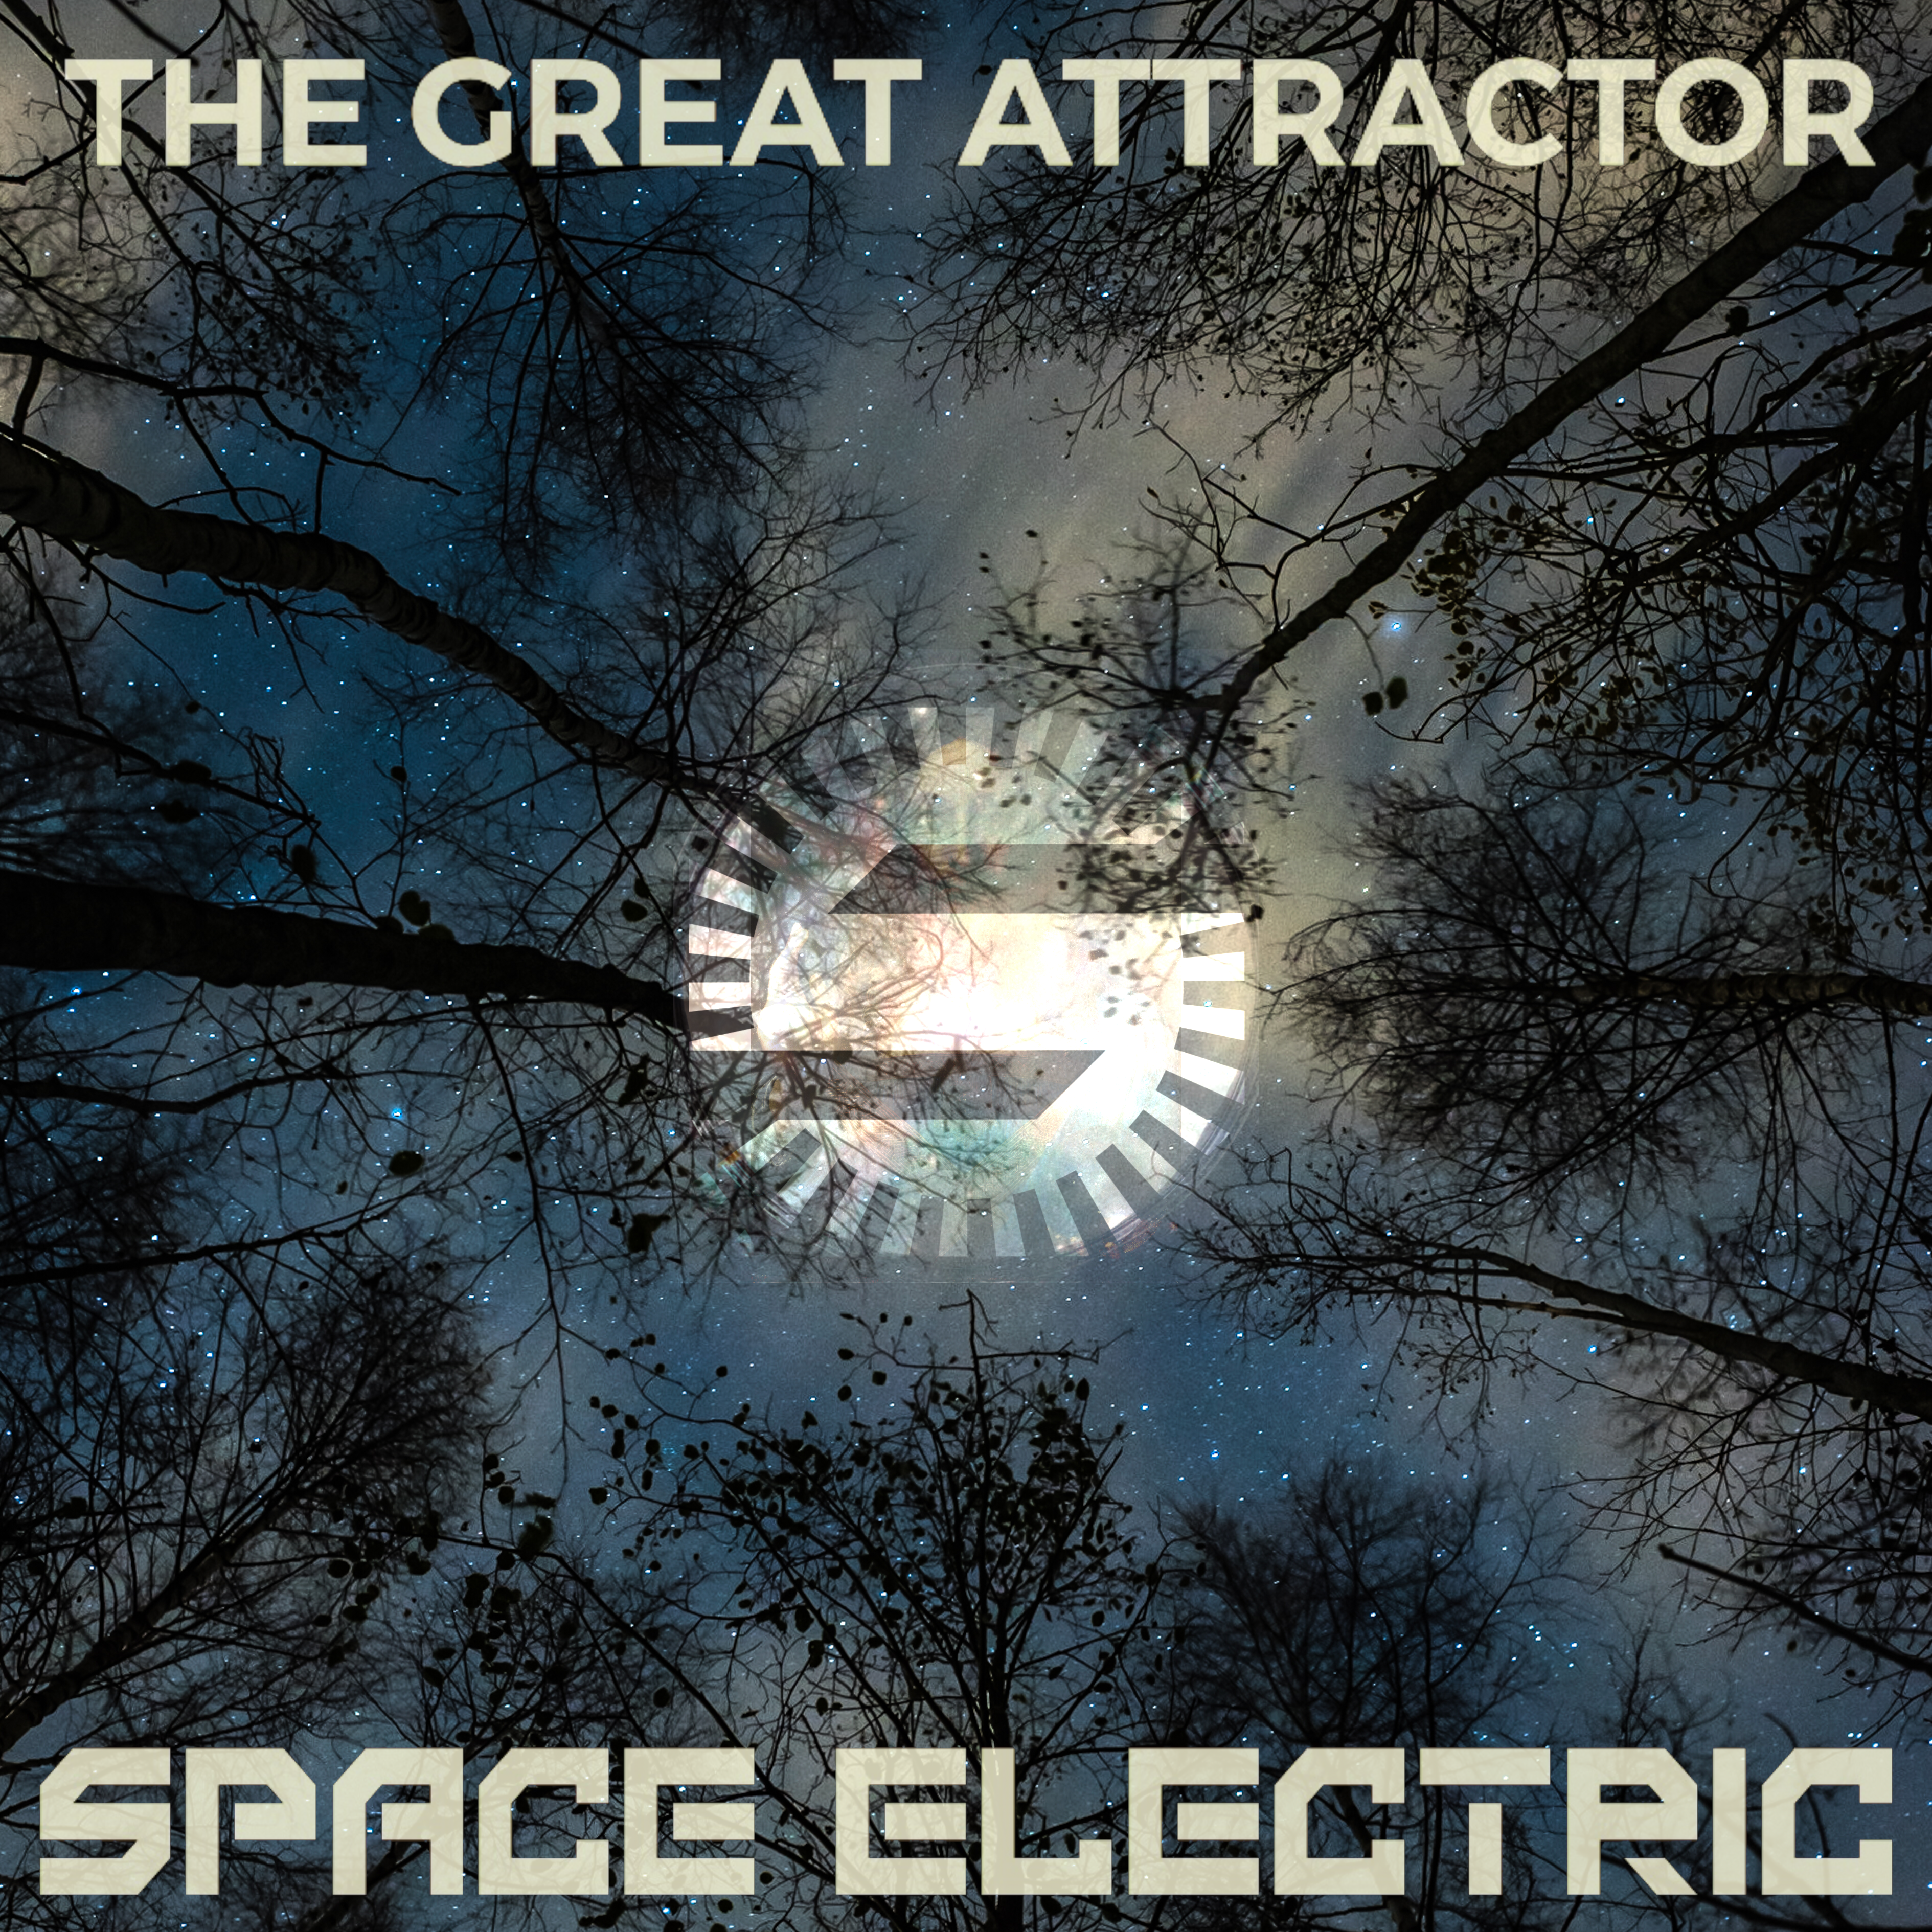 Press release - The Great Attractor - 17th of June - Space Electric